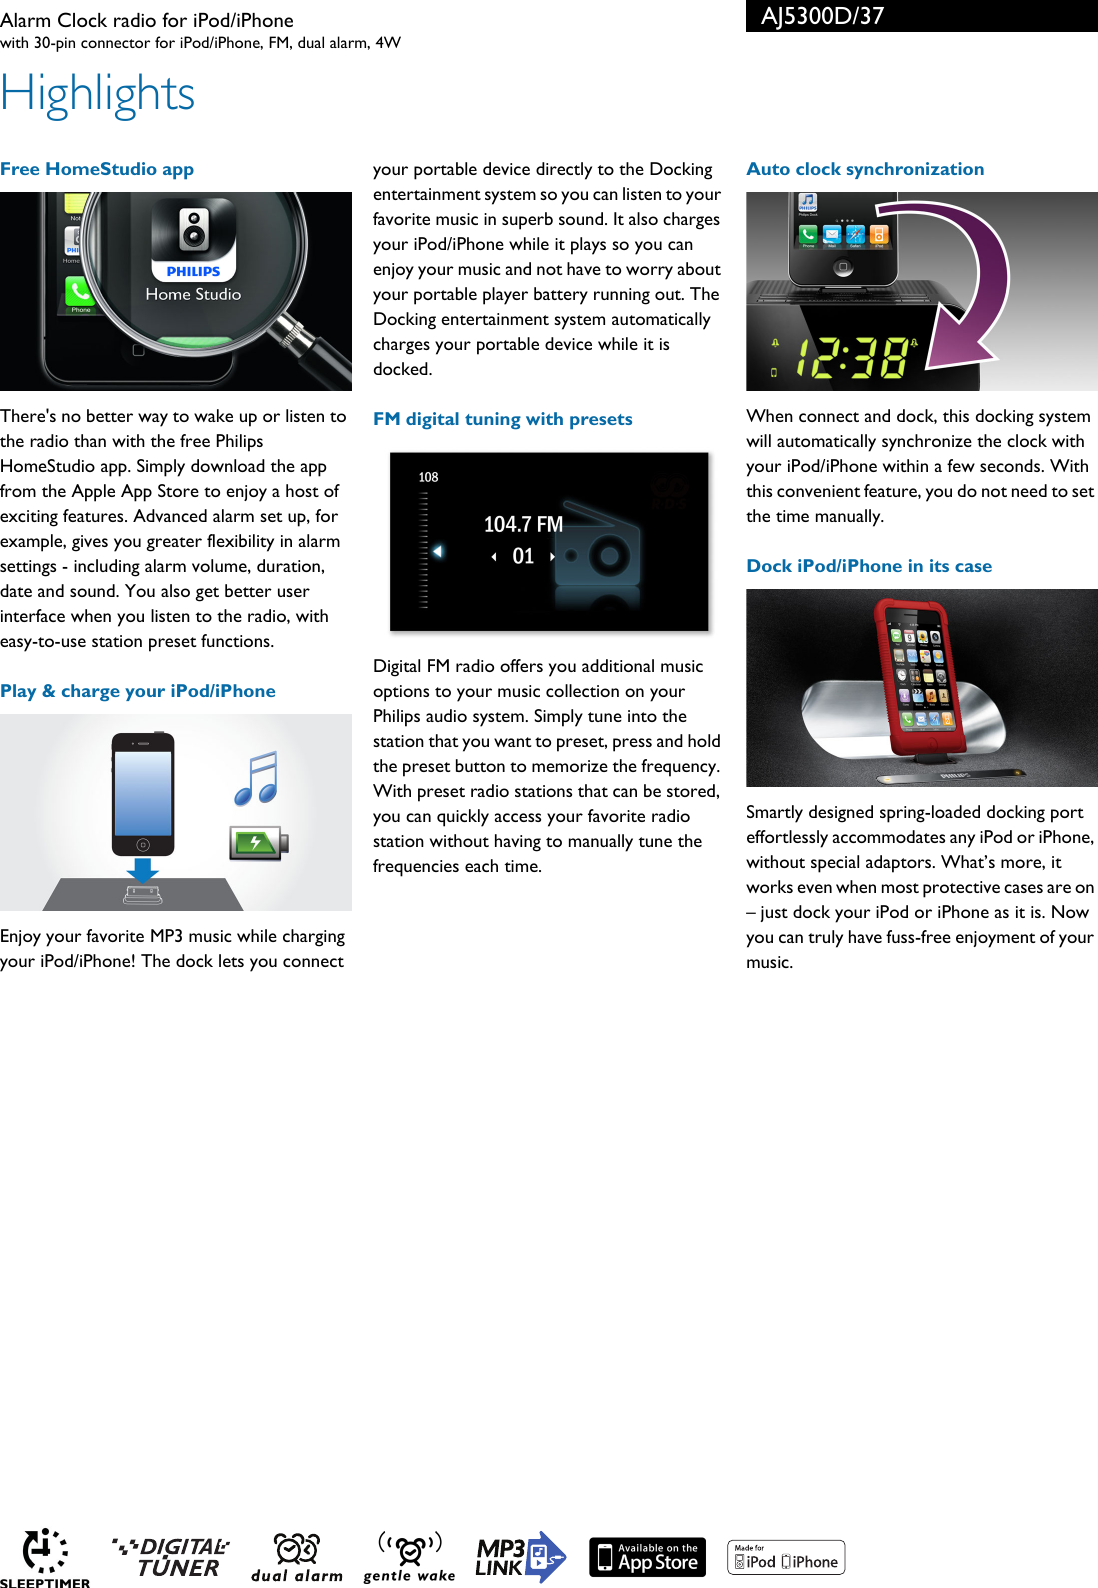 Page 2 of 3 - Philips AJ5300D/37 Alarm Clock Radio For IPod/iPhone User Manual Leaflet Aj5300d 37 Pss Aenca